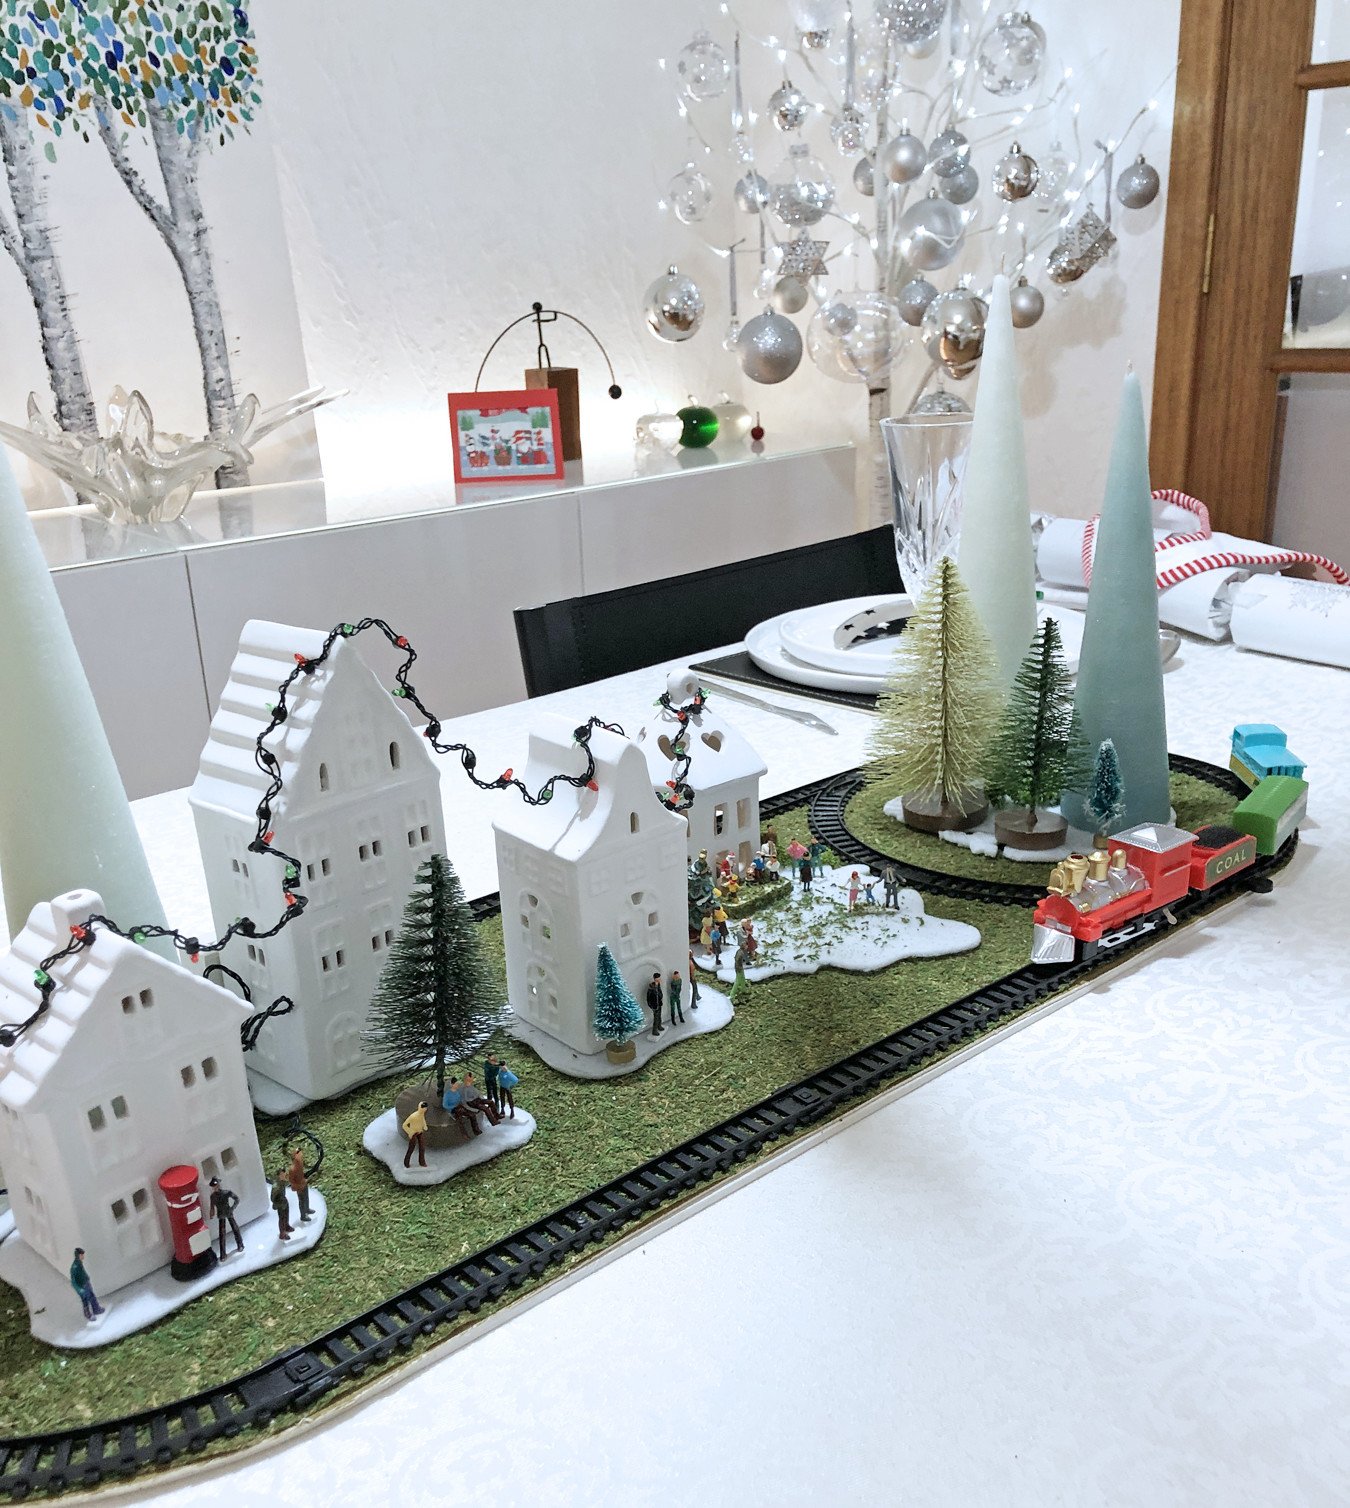 Christmas dinner table centrepiece with working train set